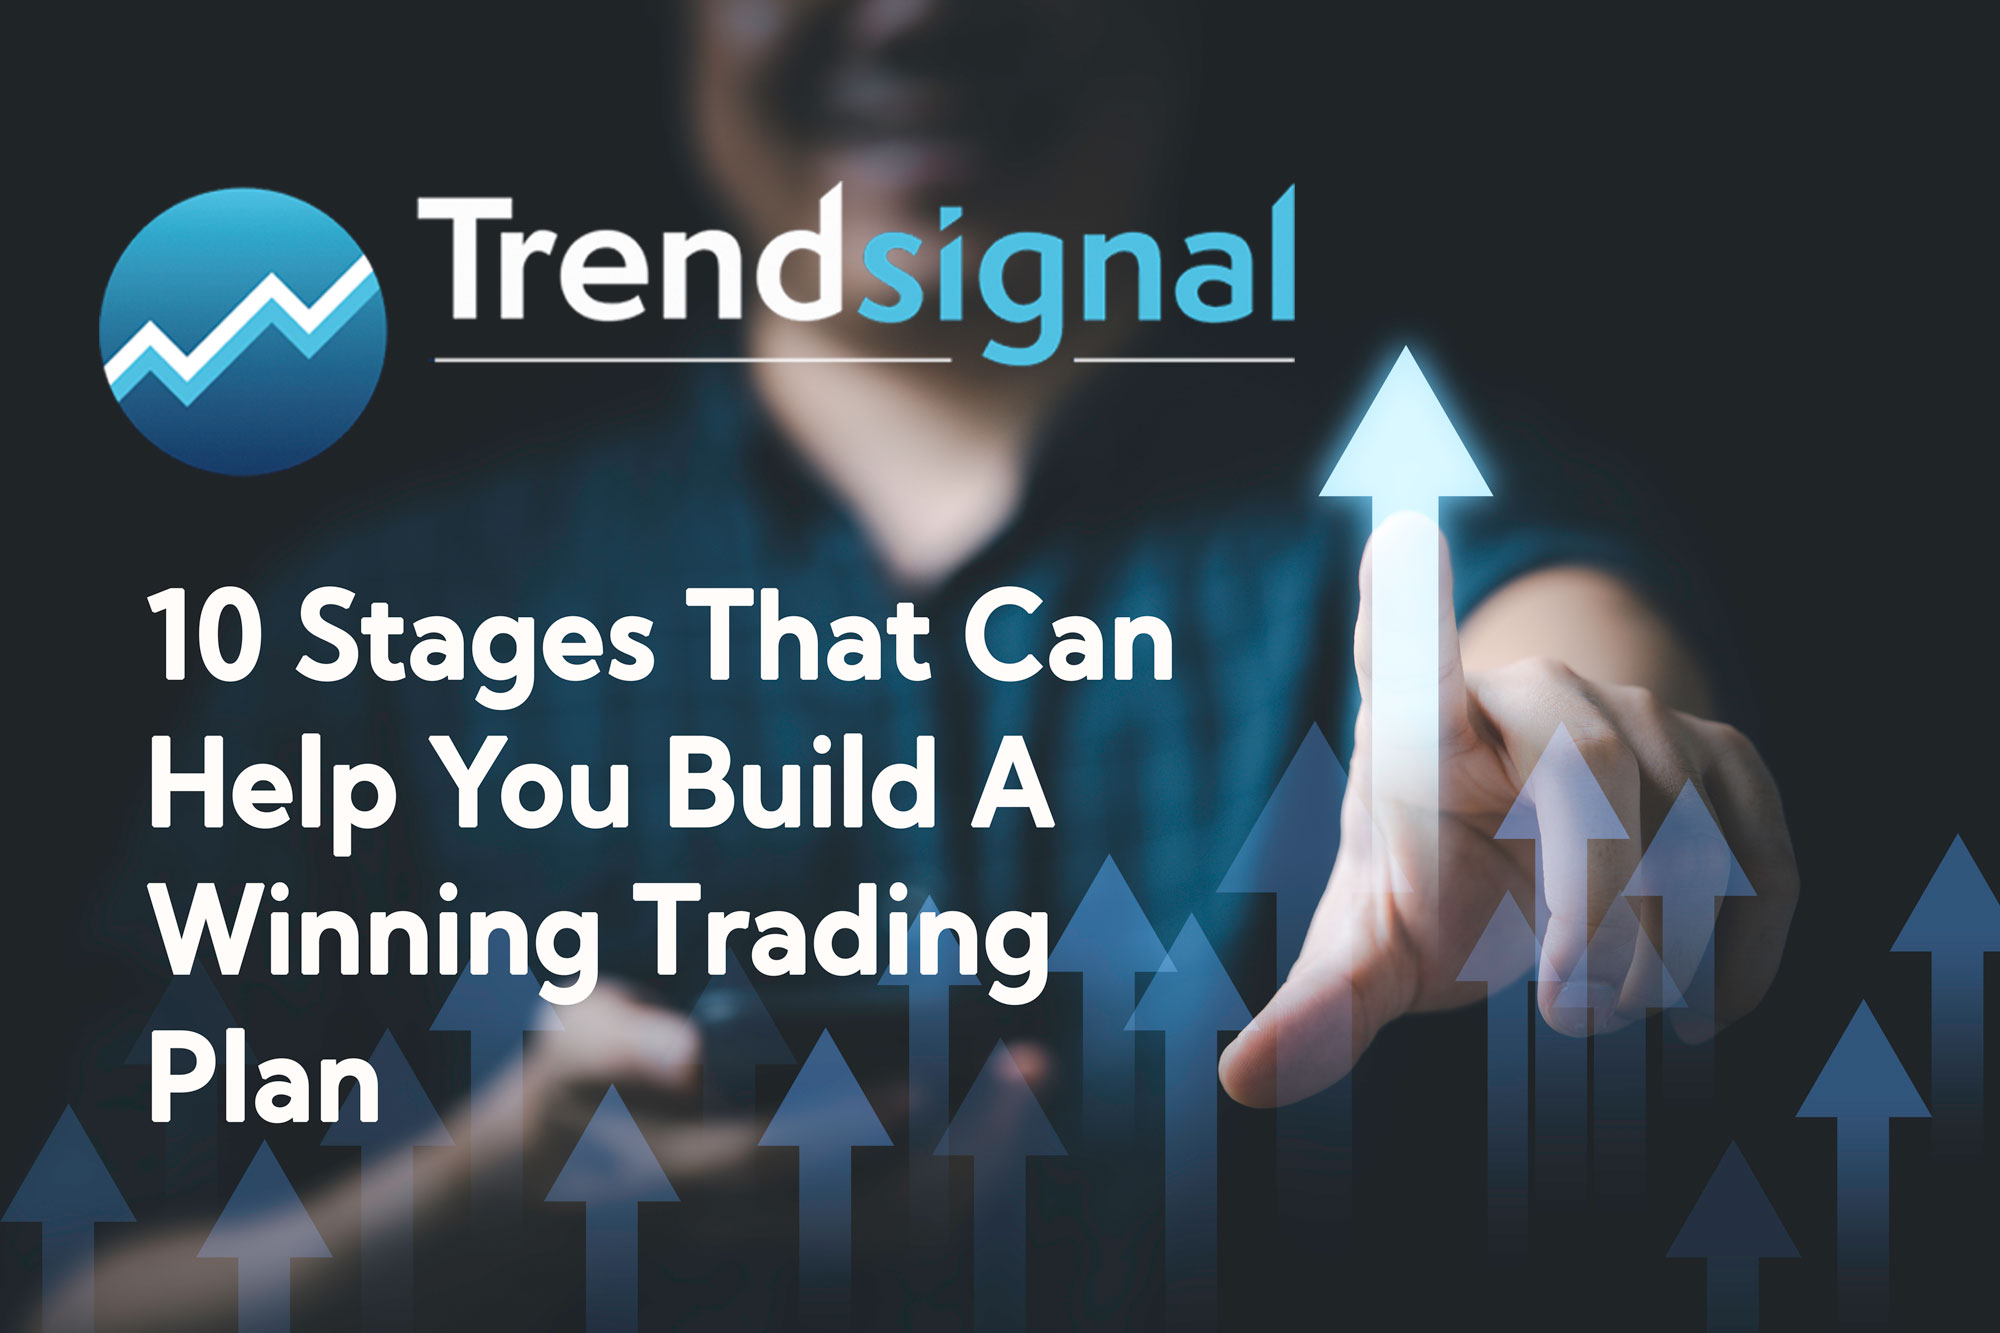 10 Stages That Can Help You Build a Winning Trading Plan